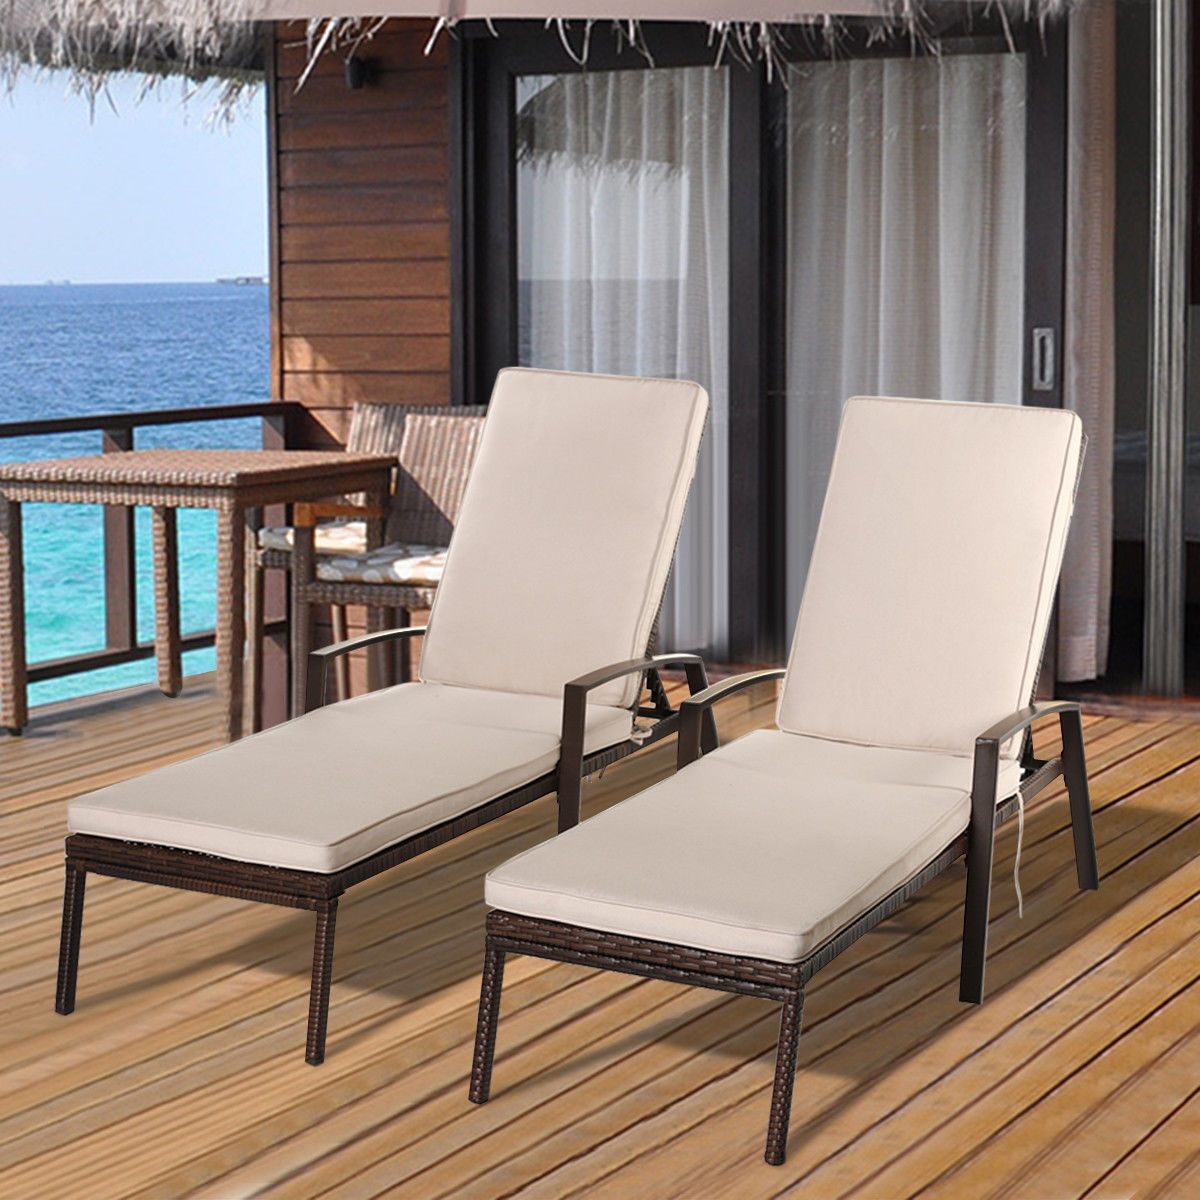 Well Liked Adjustable Outdoor Lounger Chairs Regarding Costway 2pcs Patio Rattan Lounge Chair Garden Furniture Adjustable Back (View 15 of 15)